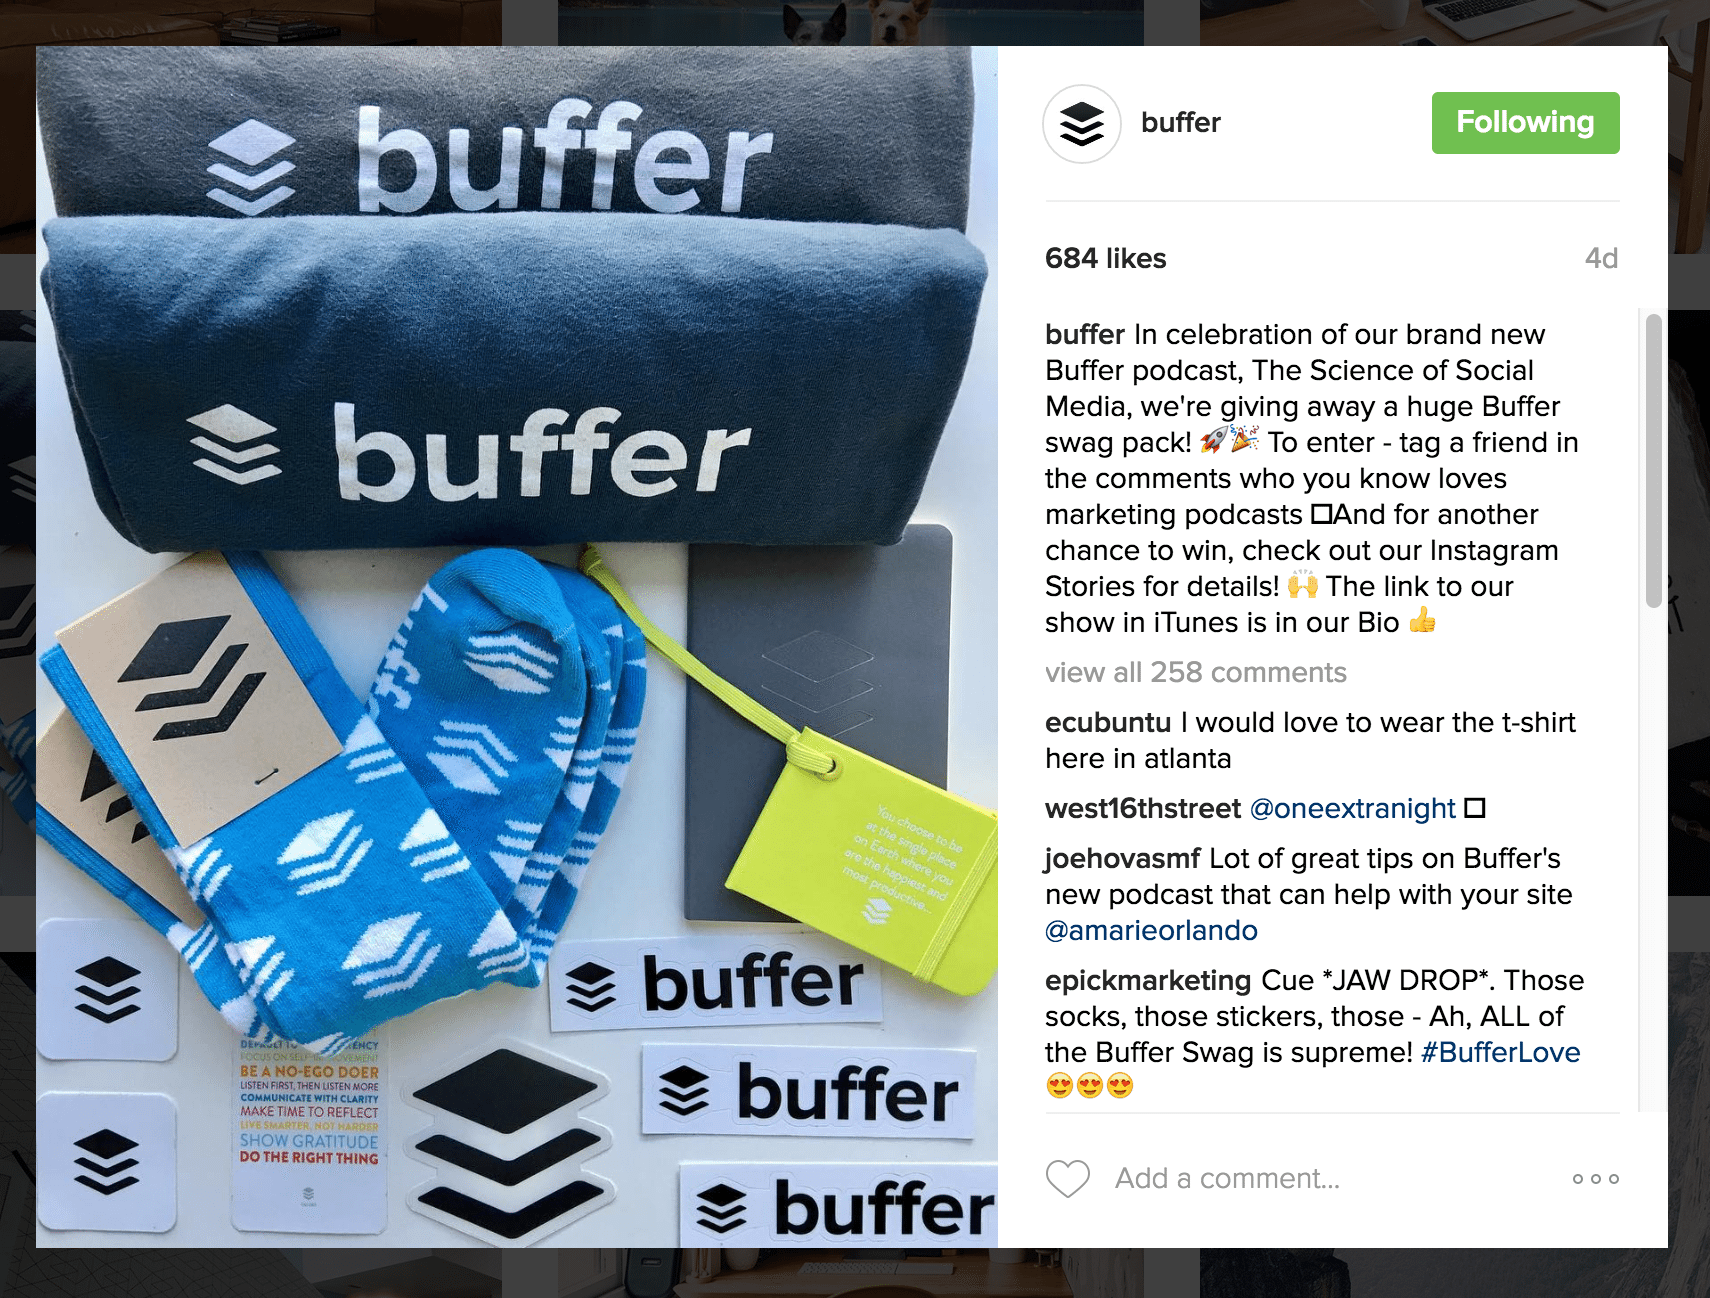 Buffer podcast marketing giveaway